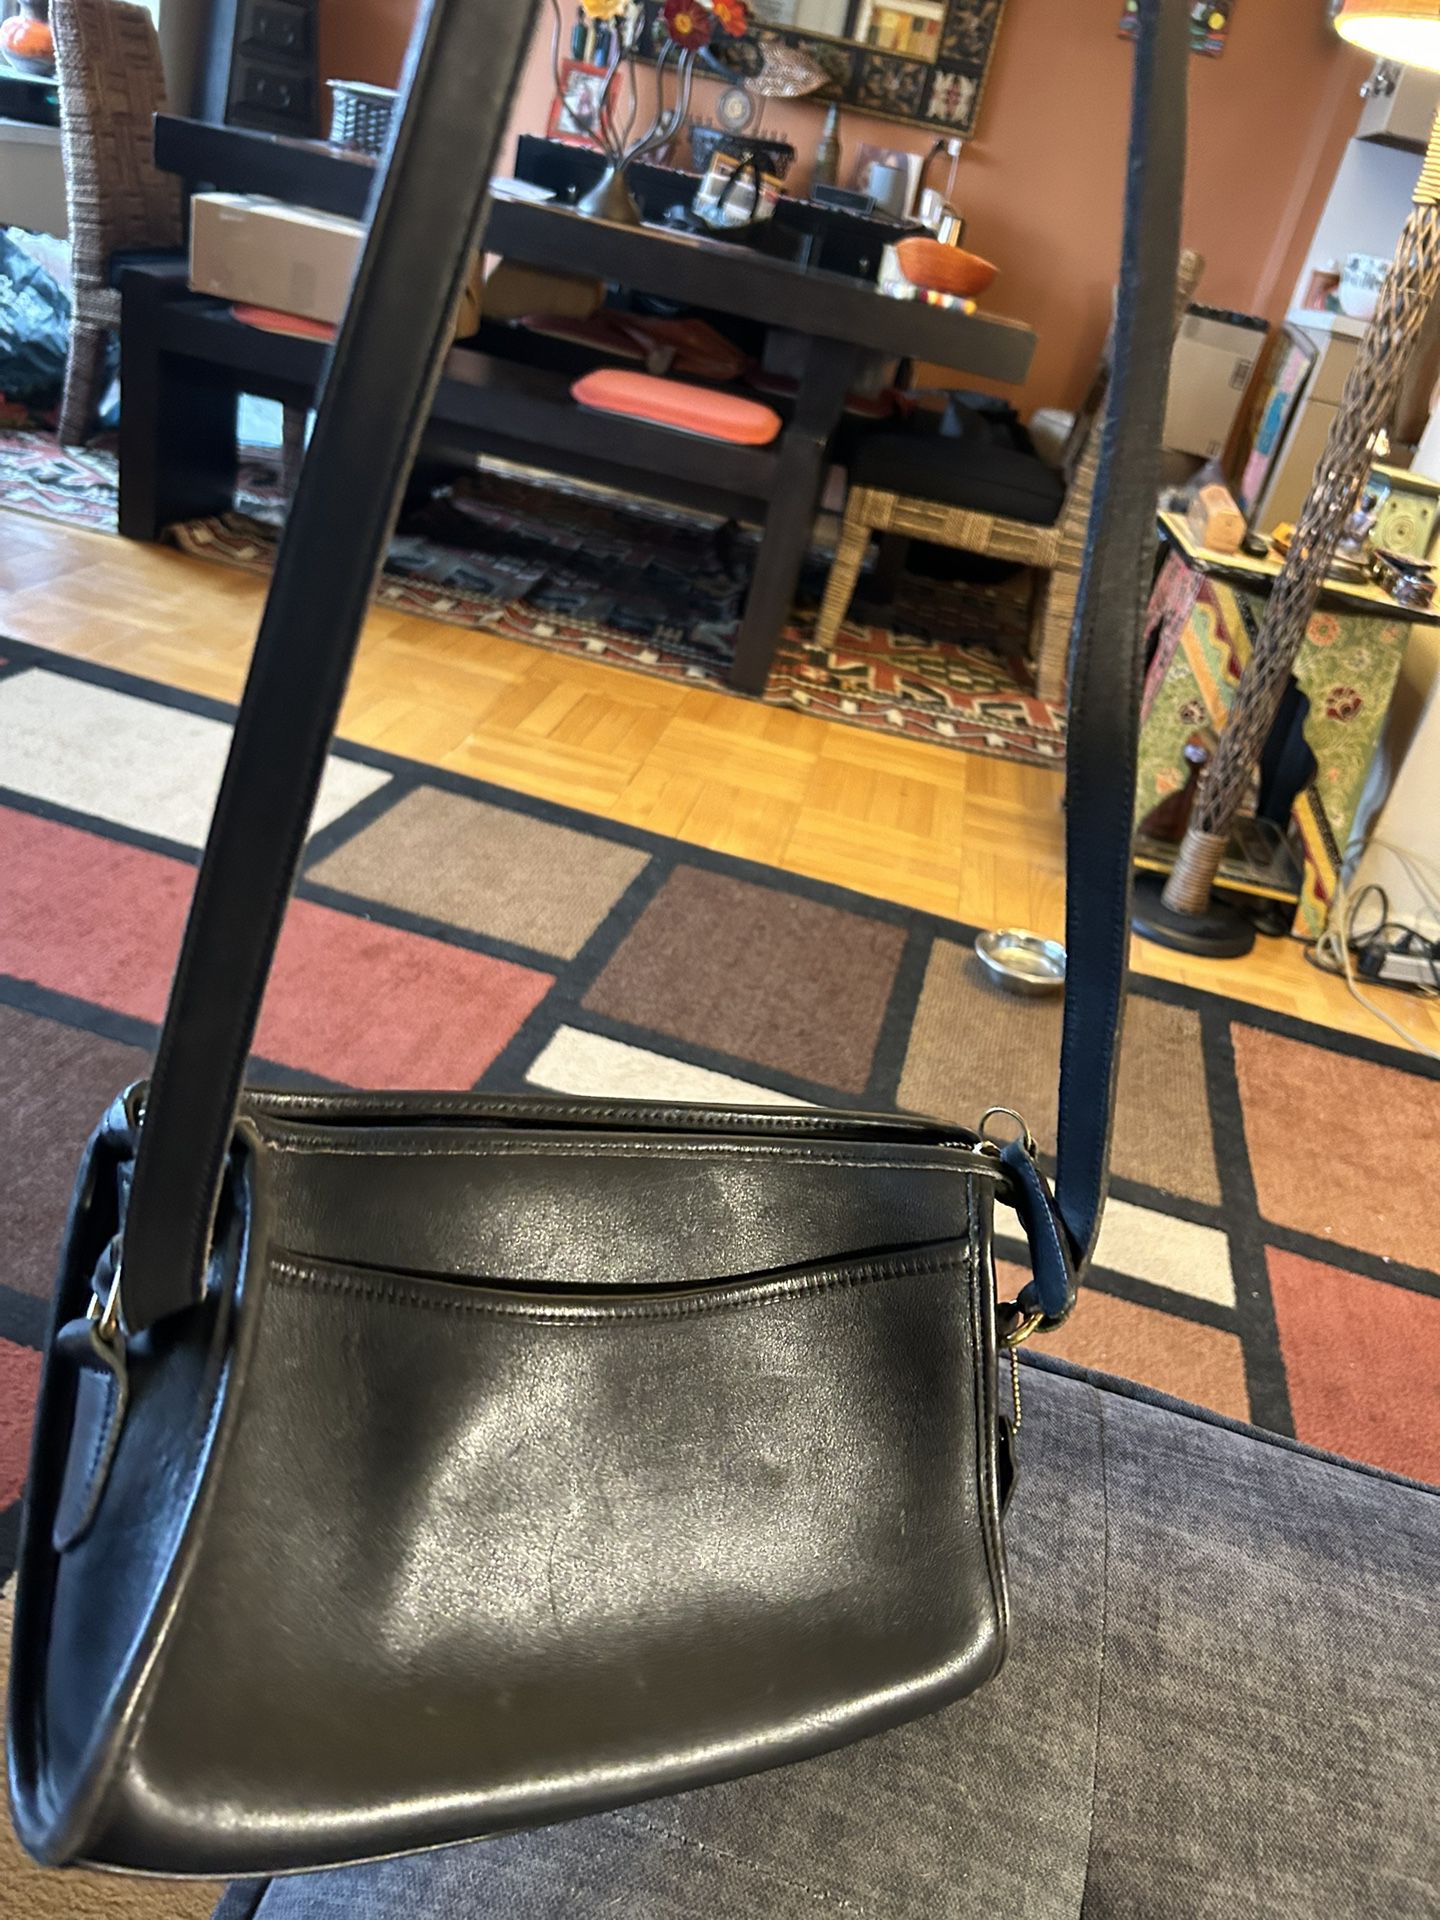 Coach Katy Satchel Bag for Sale in Chicago, IL - OfferUp